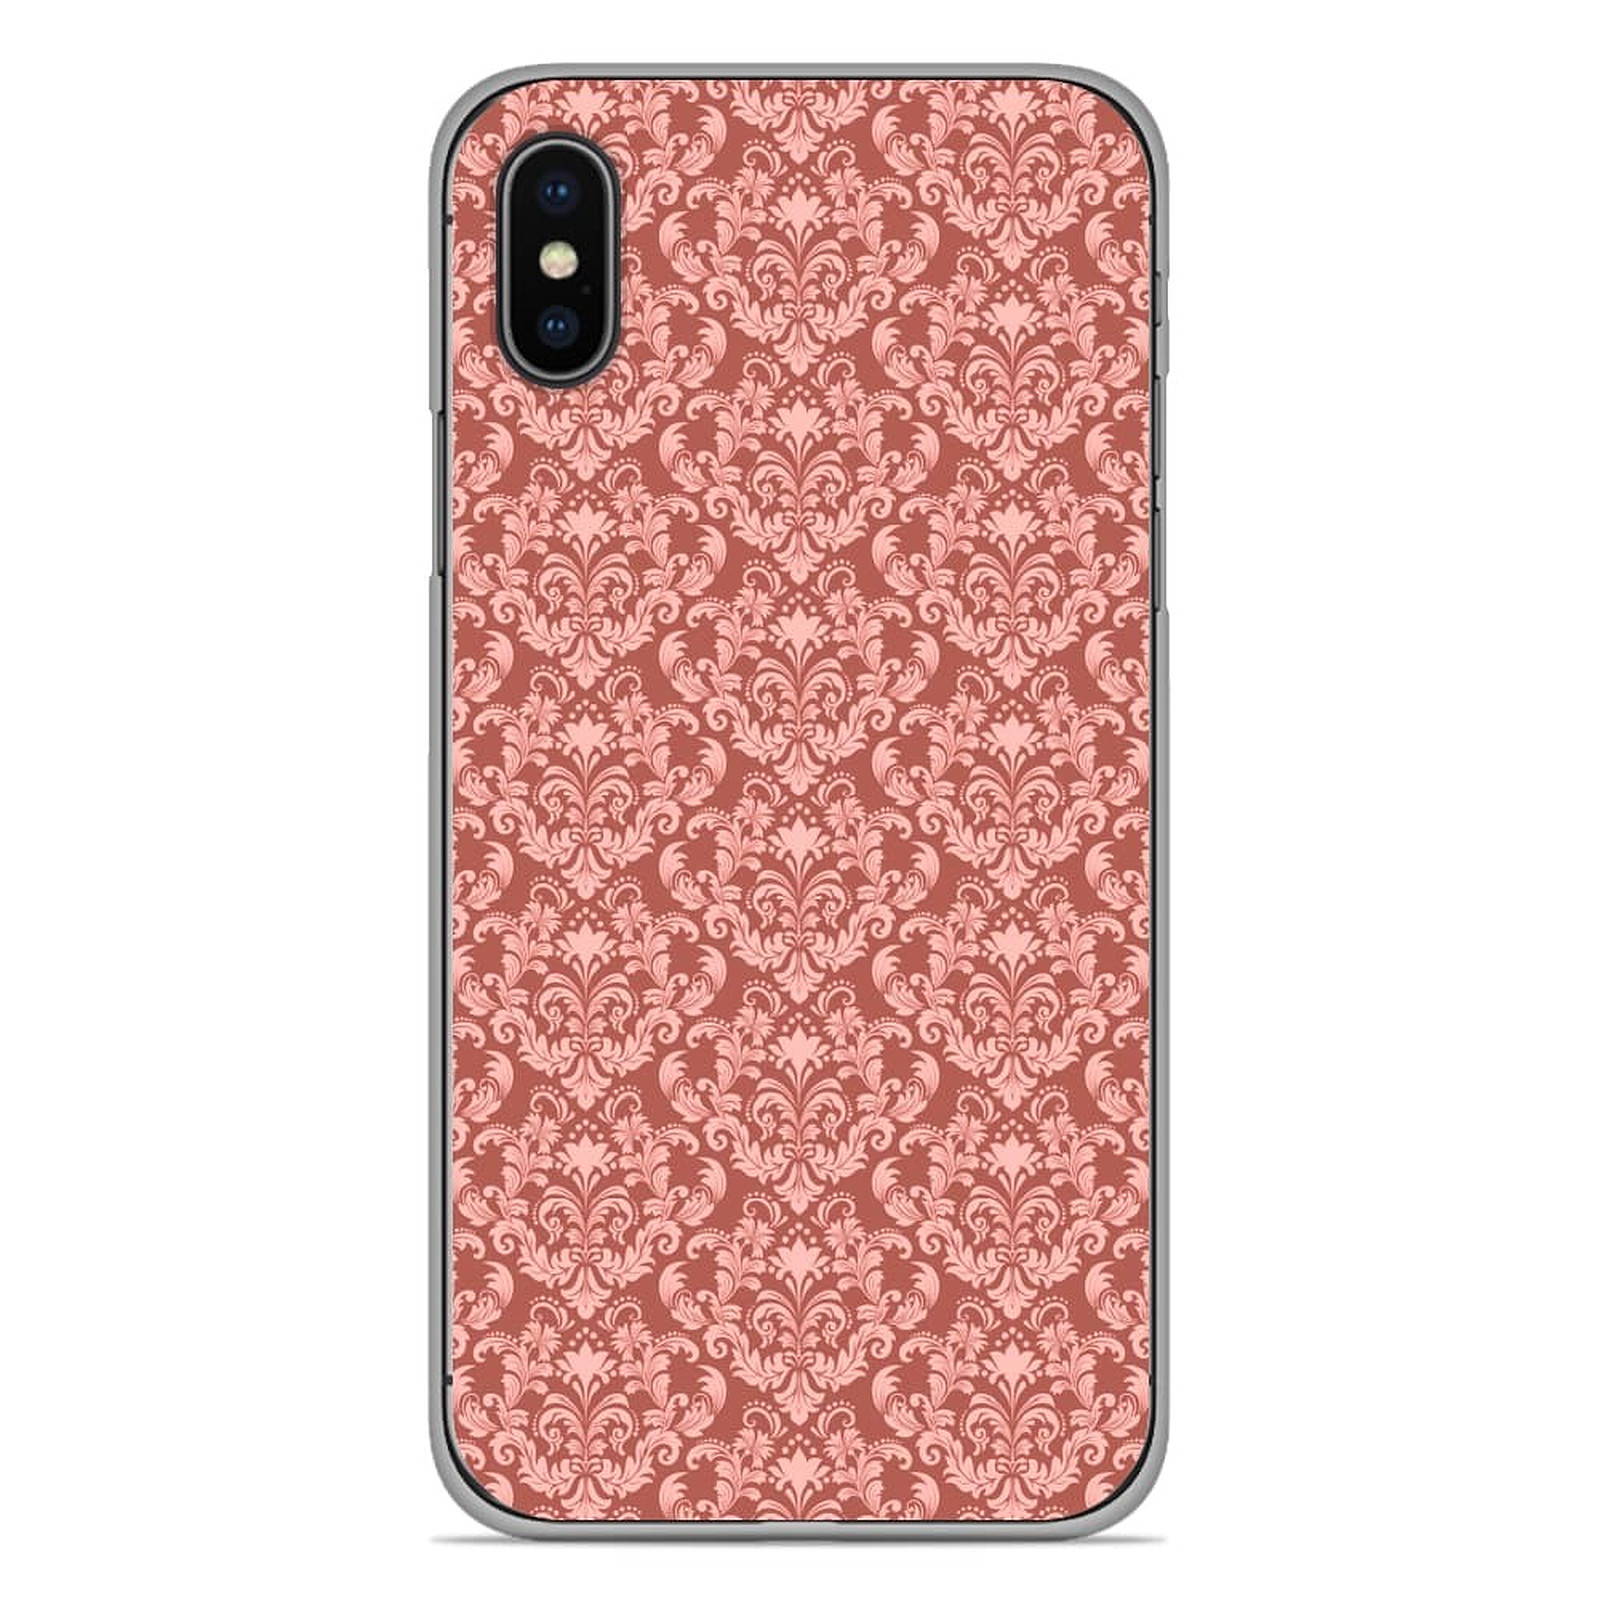 1001 Coques Coque silicone gel Apple iPhone X / XS motif Baroque - Coque telephone 1001Coques